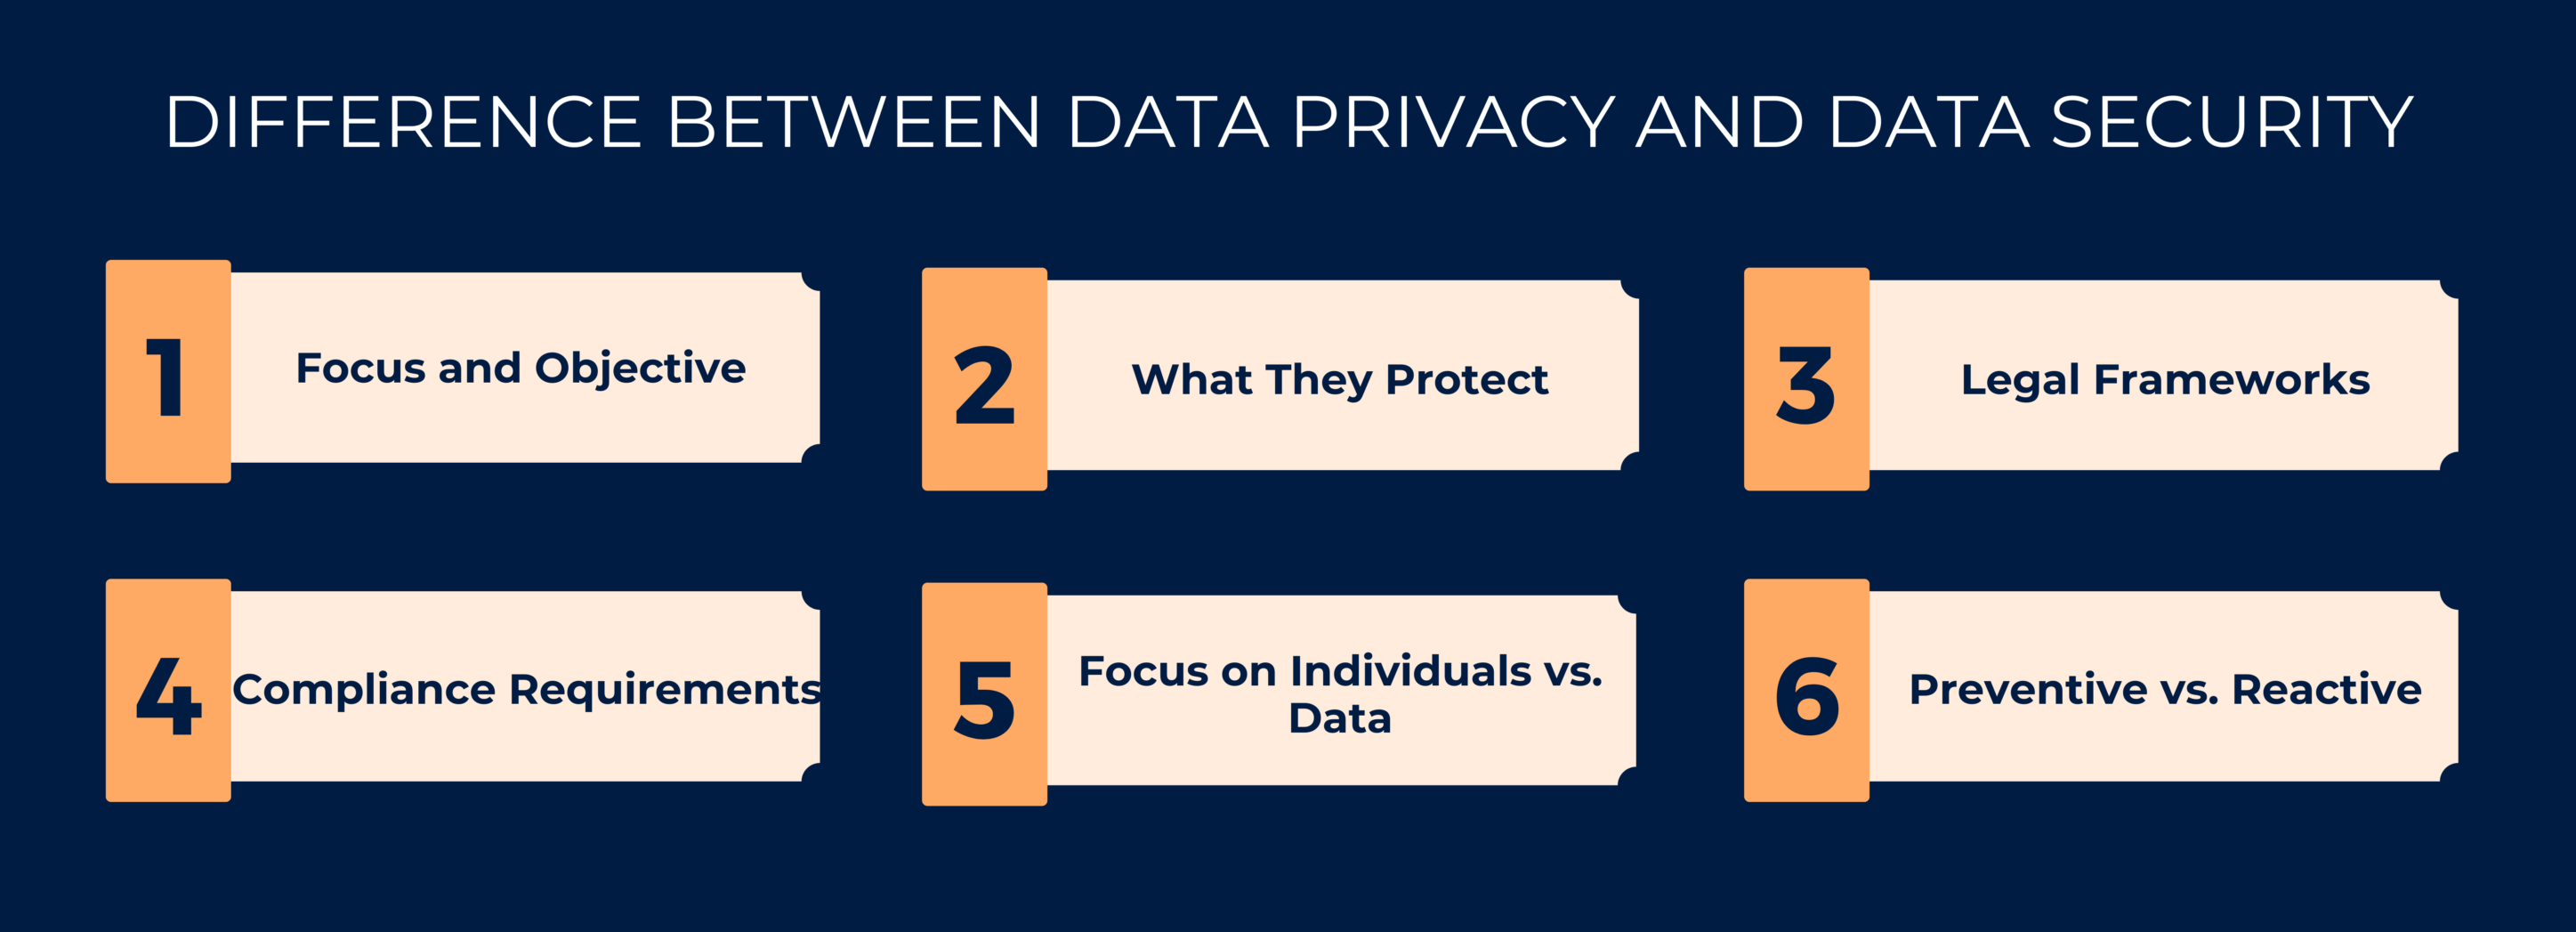 Differences Data Privacy and Security